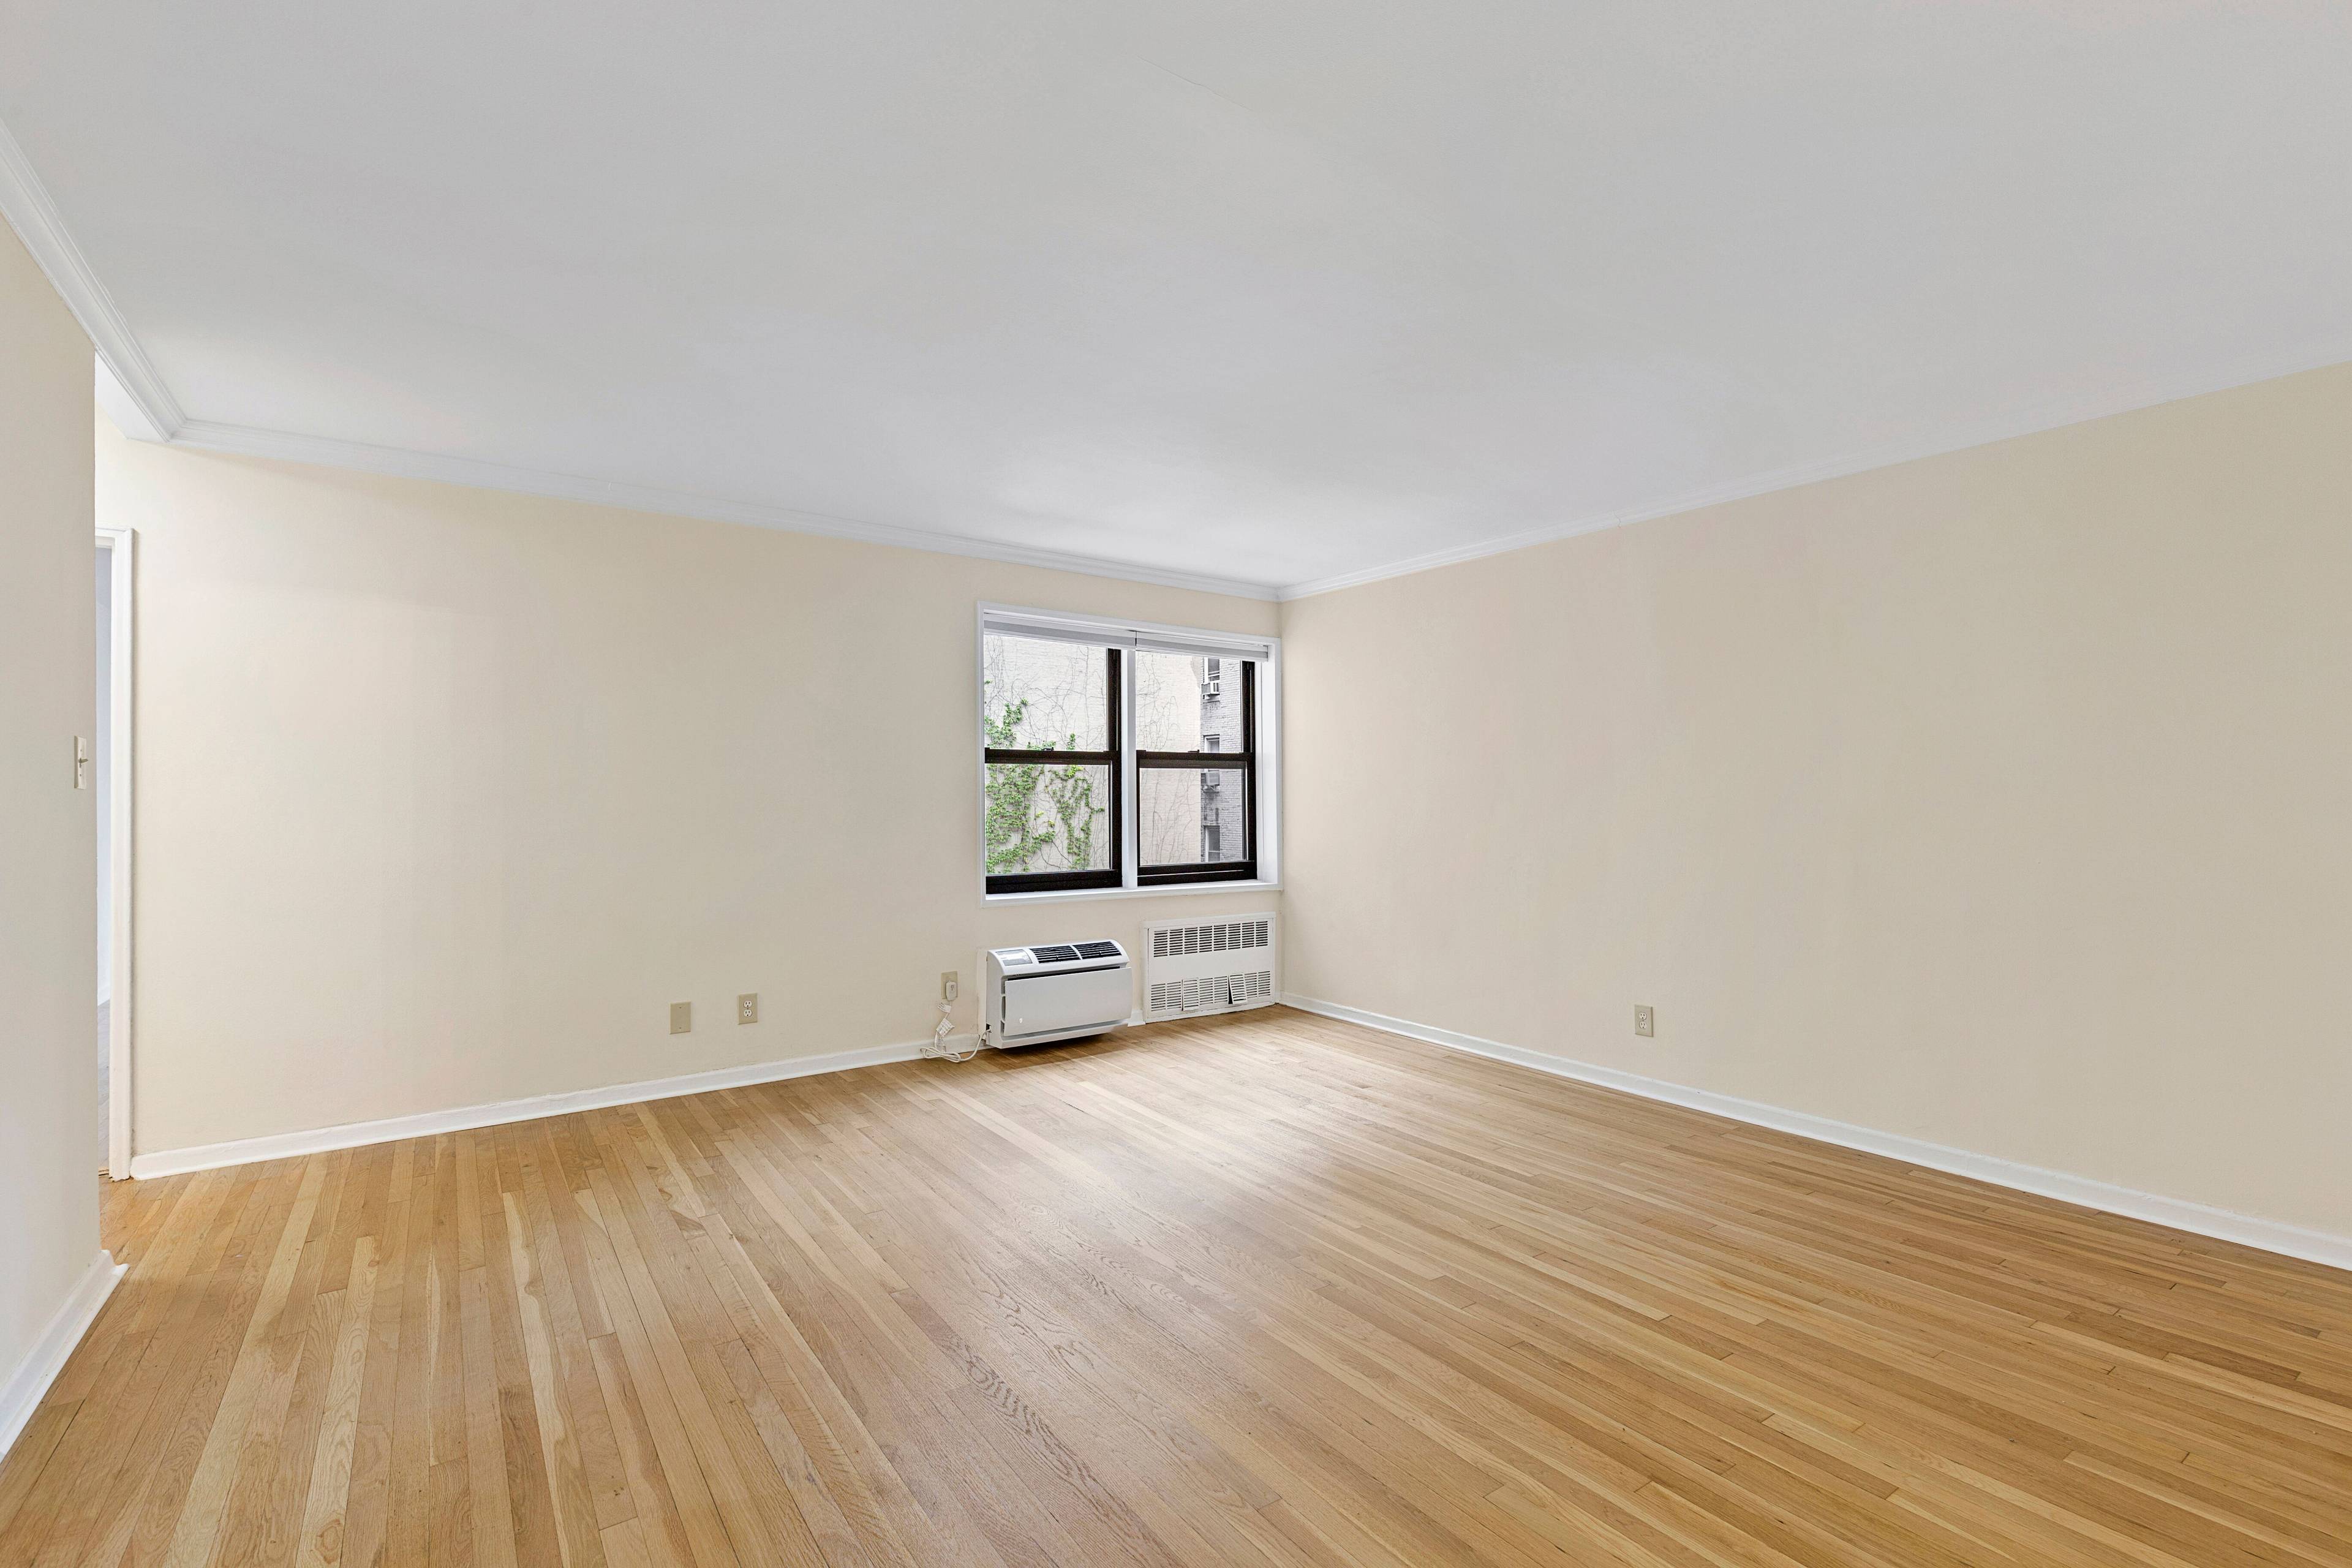 NEWLY RENOVATED LARGE 1 BEDROOM APARTMENT IN THE HEART OF CHELSEA!